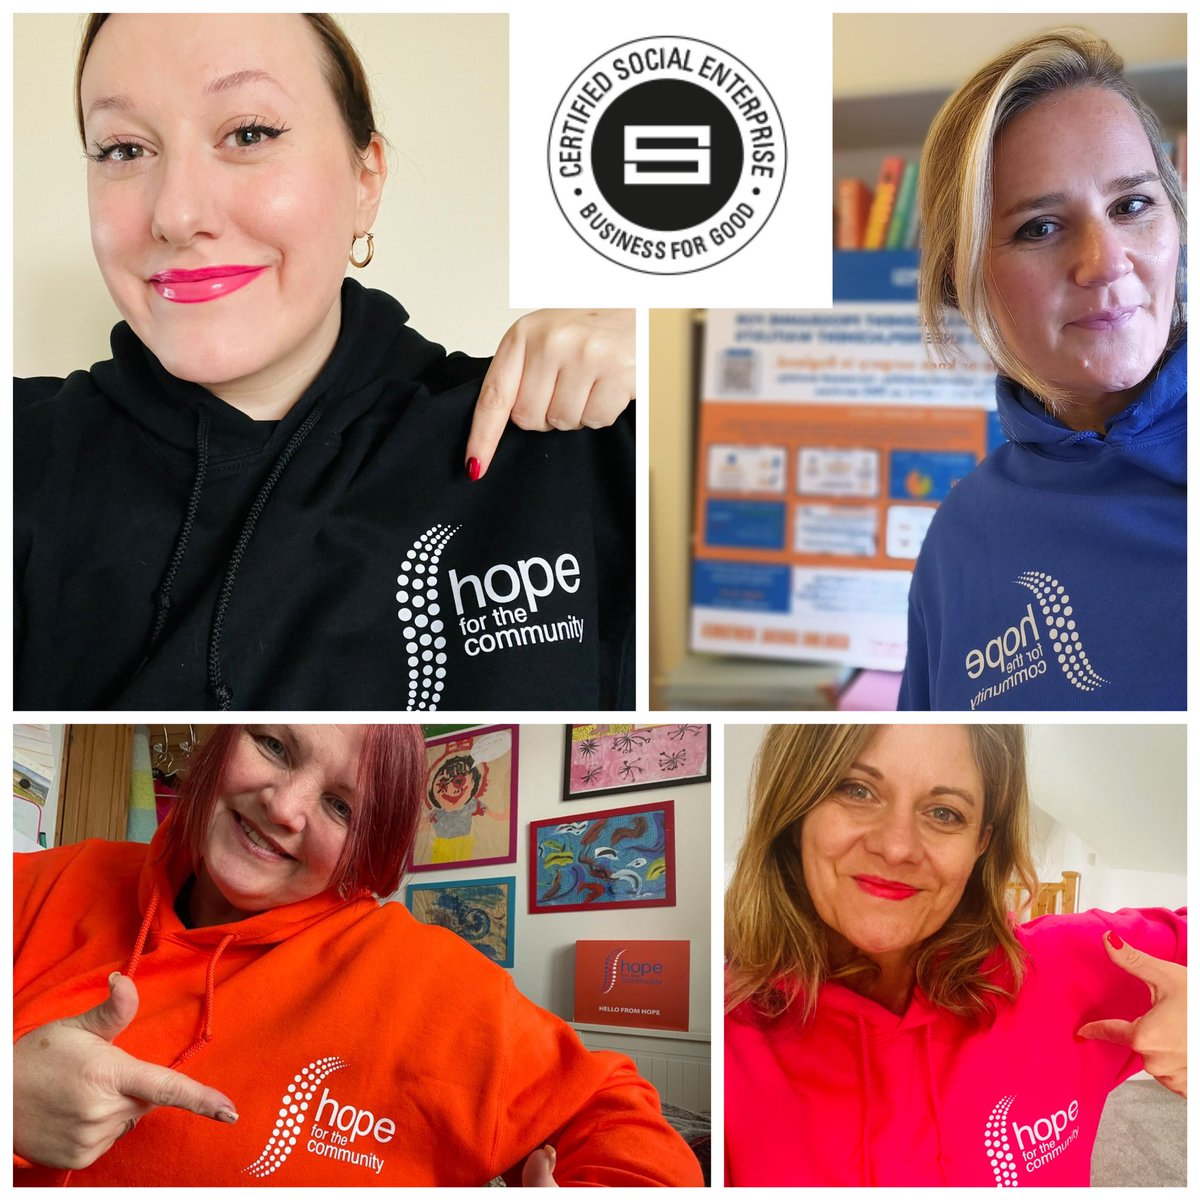 On #SocialEnterpriseDay we are proud to be part of UKs growing #socialeconomy and using business and #techforgood. It gives us HOPE! Our team celebrating the #SocEnt community! Join us, buy social, buy local #hopeforthecommunity @SocialEnt_UK